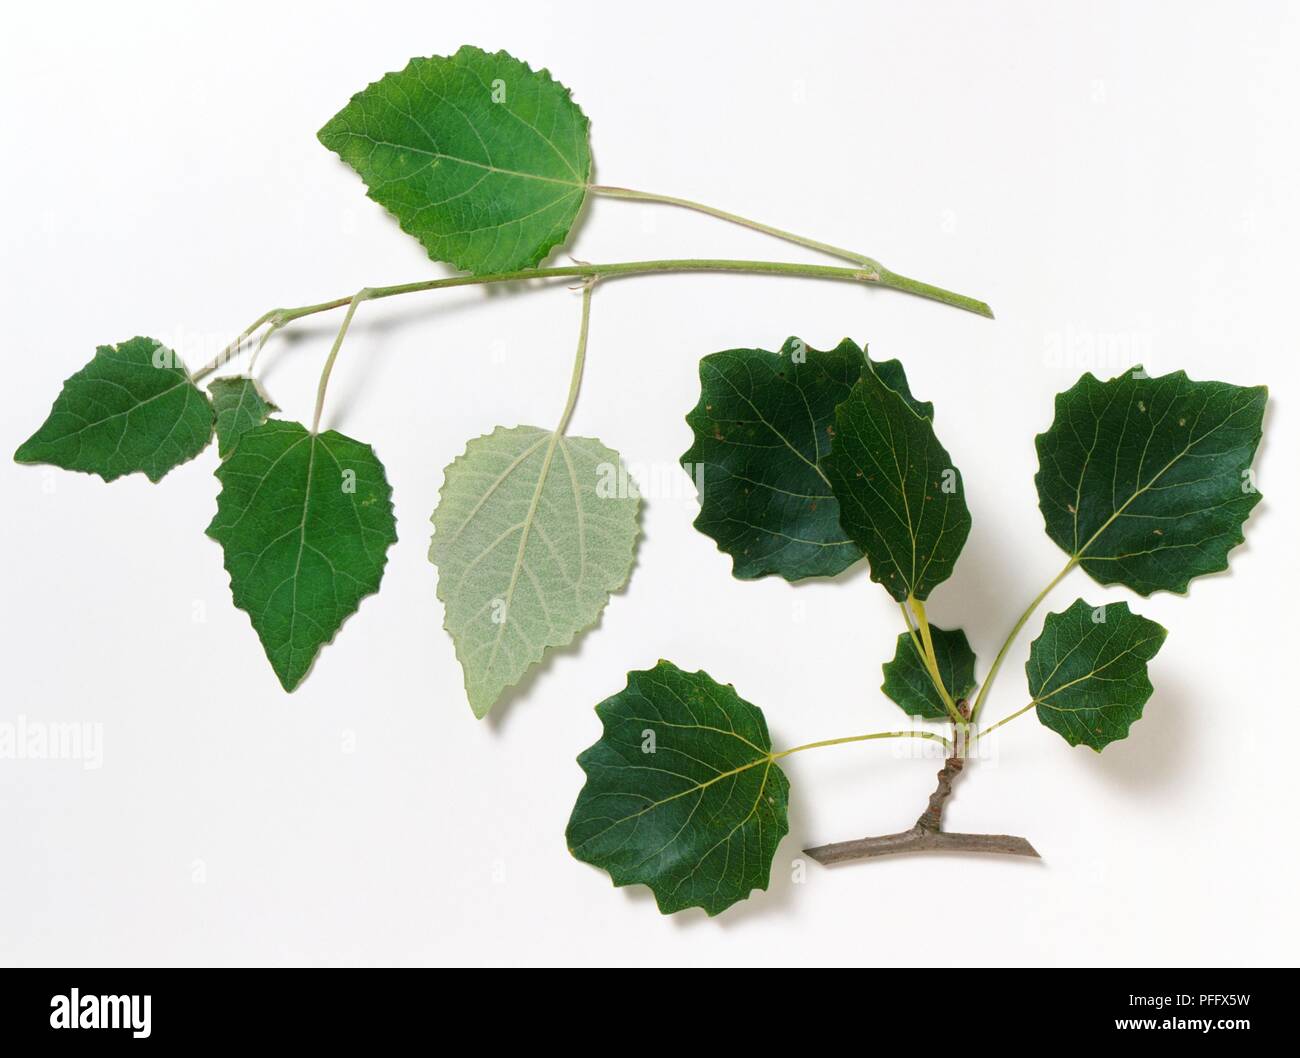 Populus x canescens (Grey poplar), stems with leaves, close-up Stock Photo